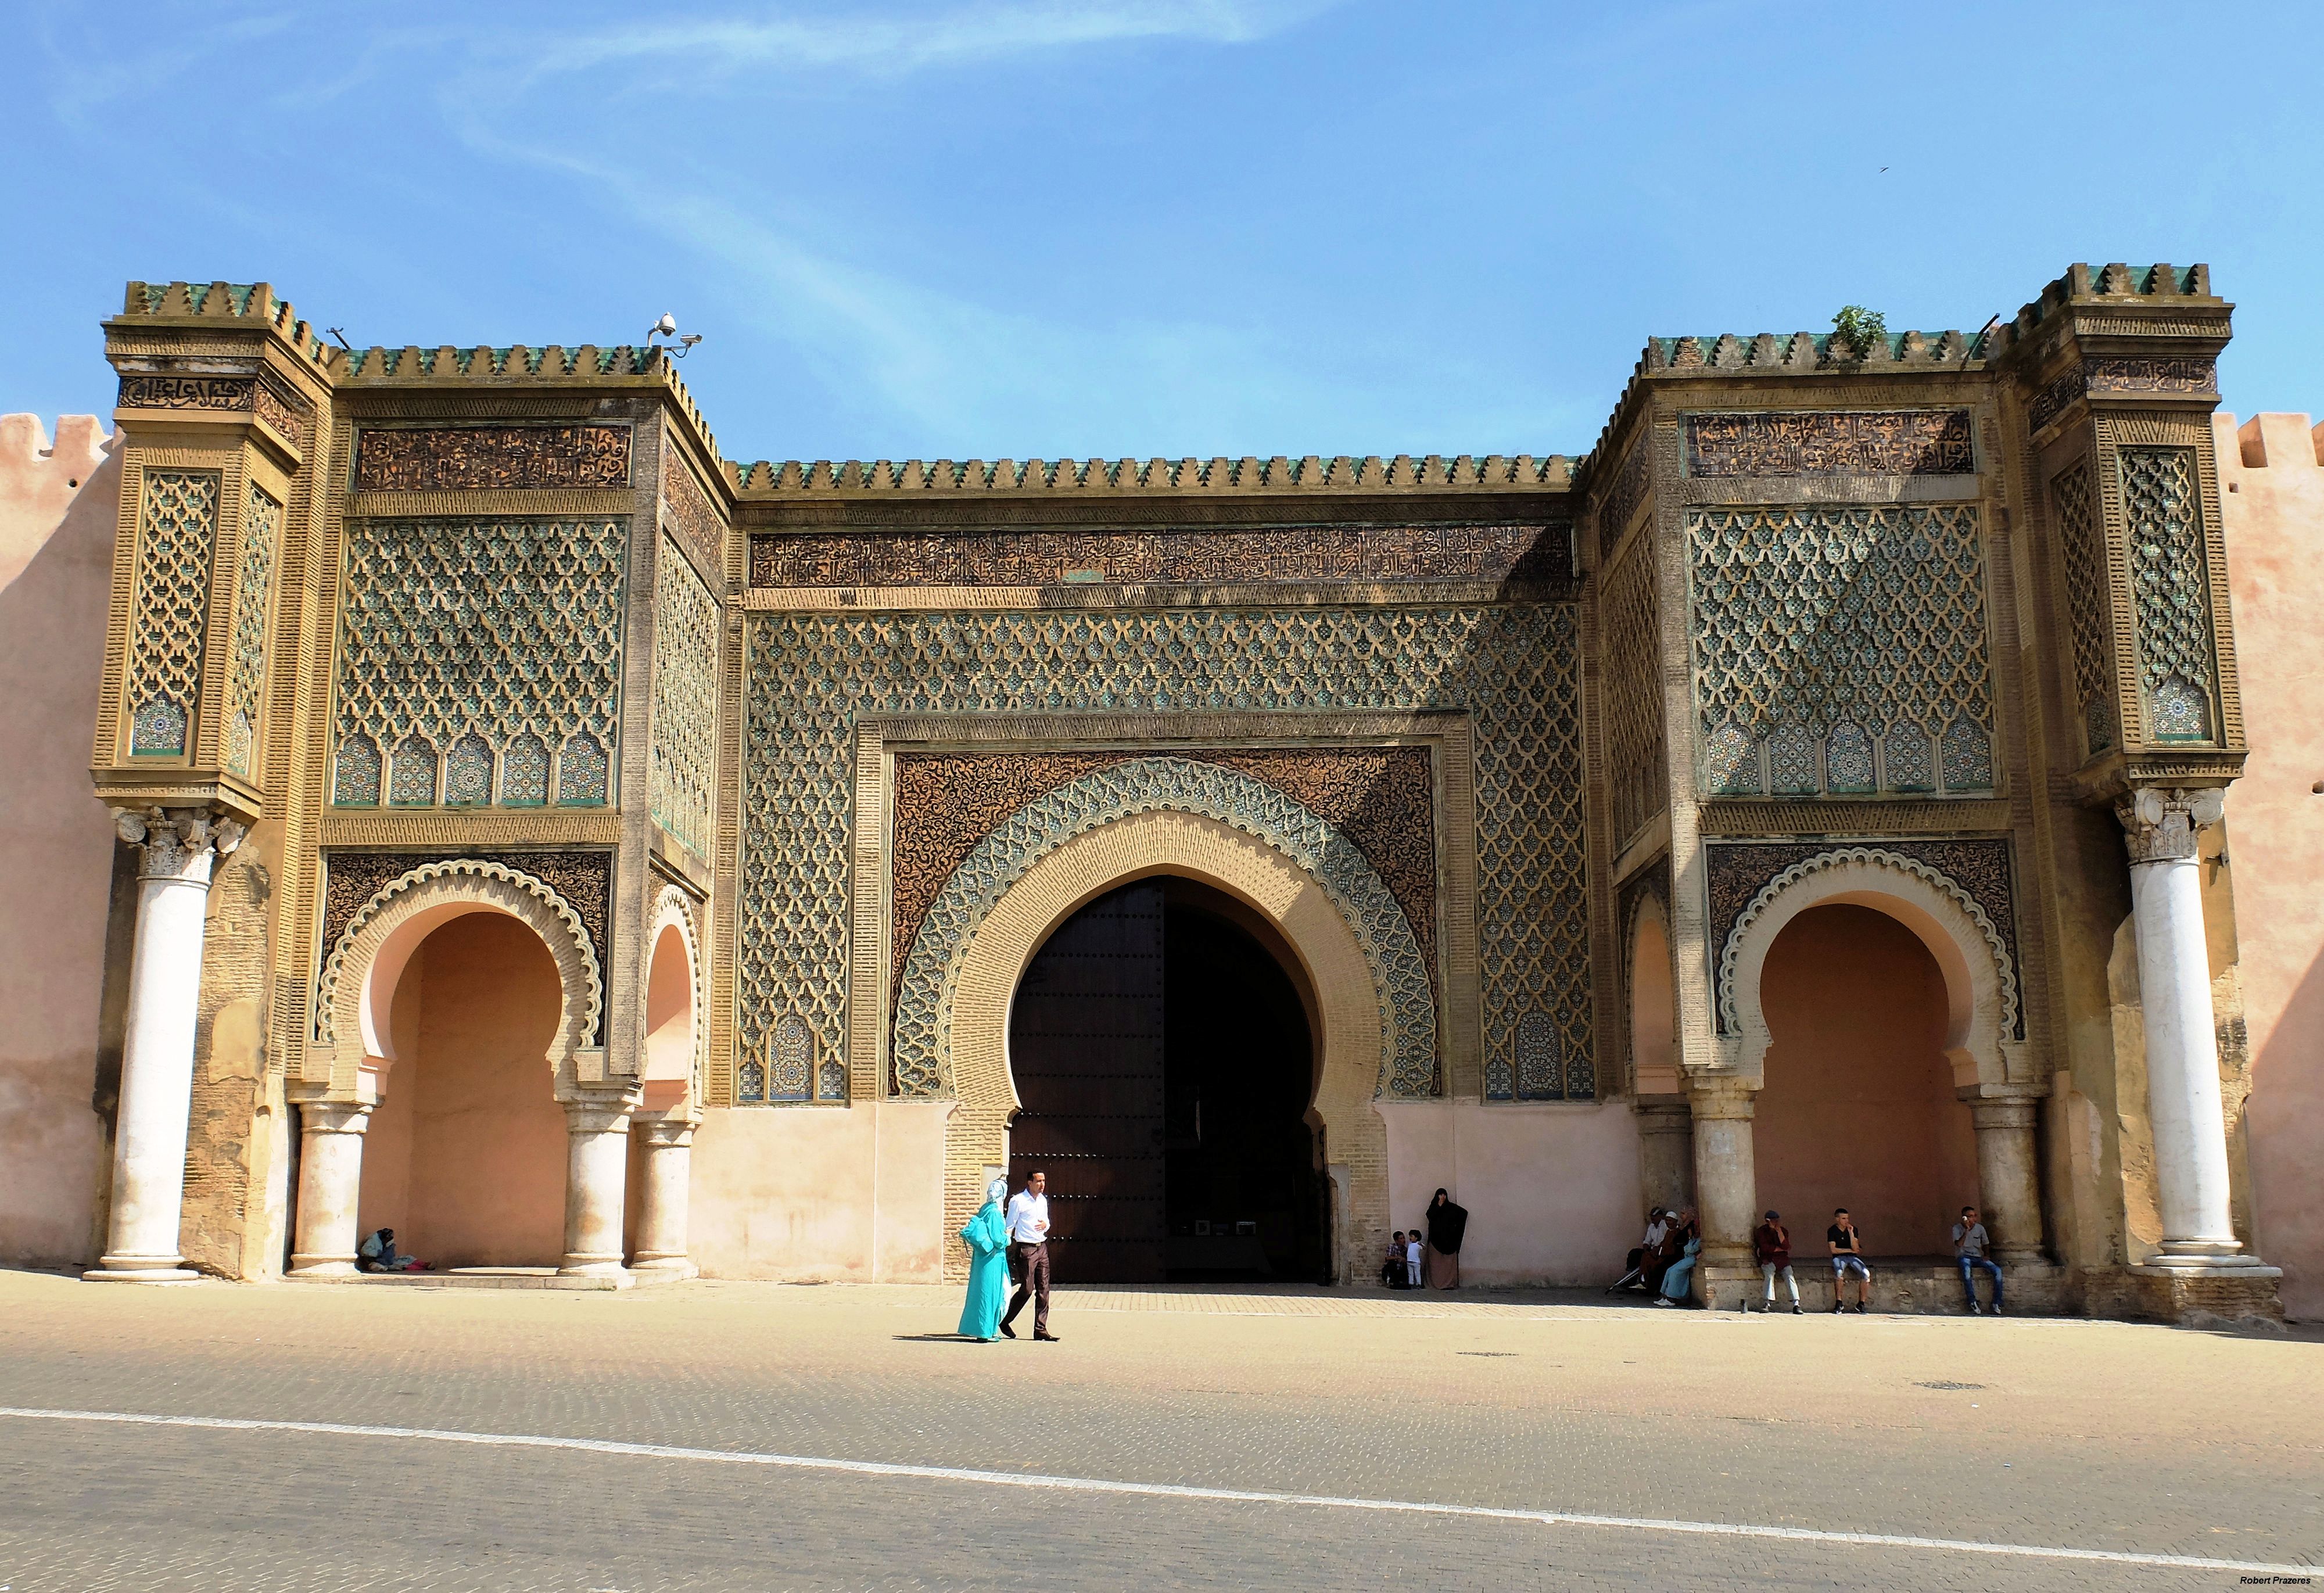 10 days heritage of Morocco tailor-made tour from Casablanca to discover Imperial cities and Sahara Desert of Morocco